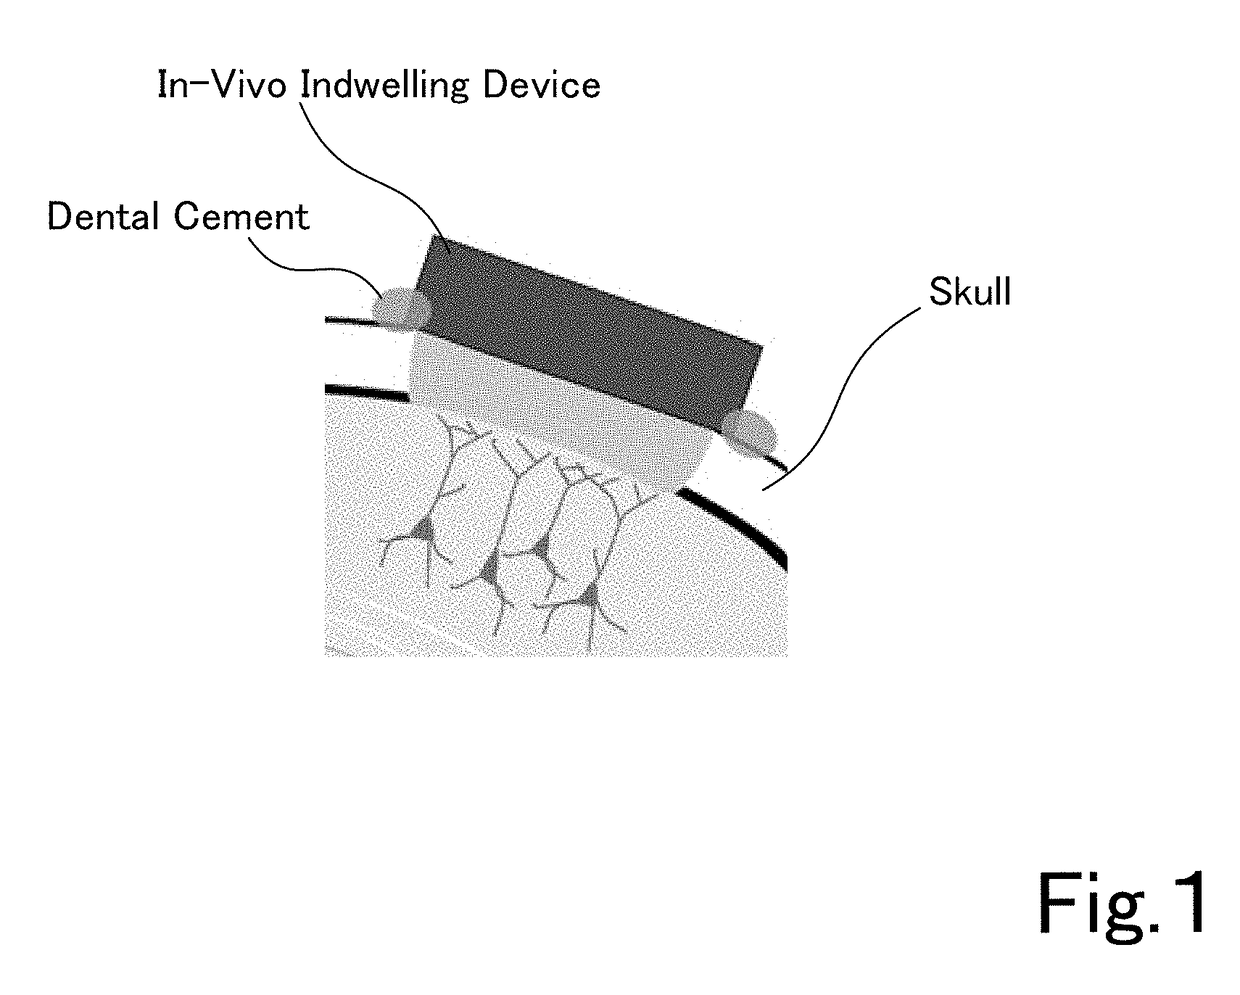 Translucent in-vivo indwelling device and utilization thereof